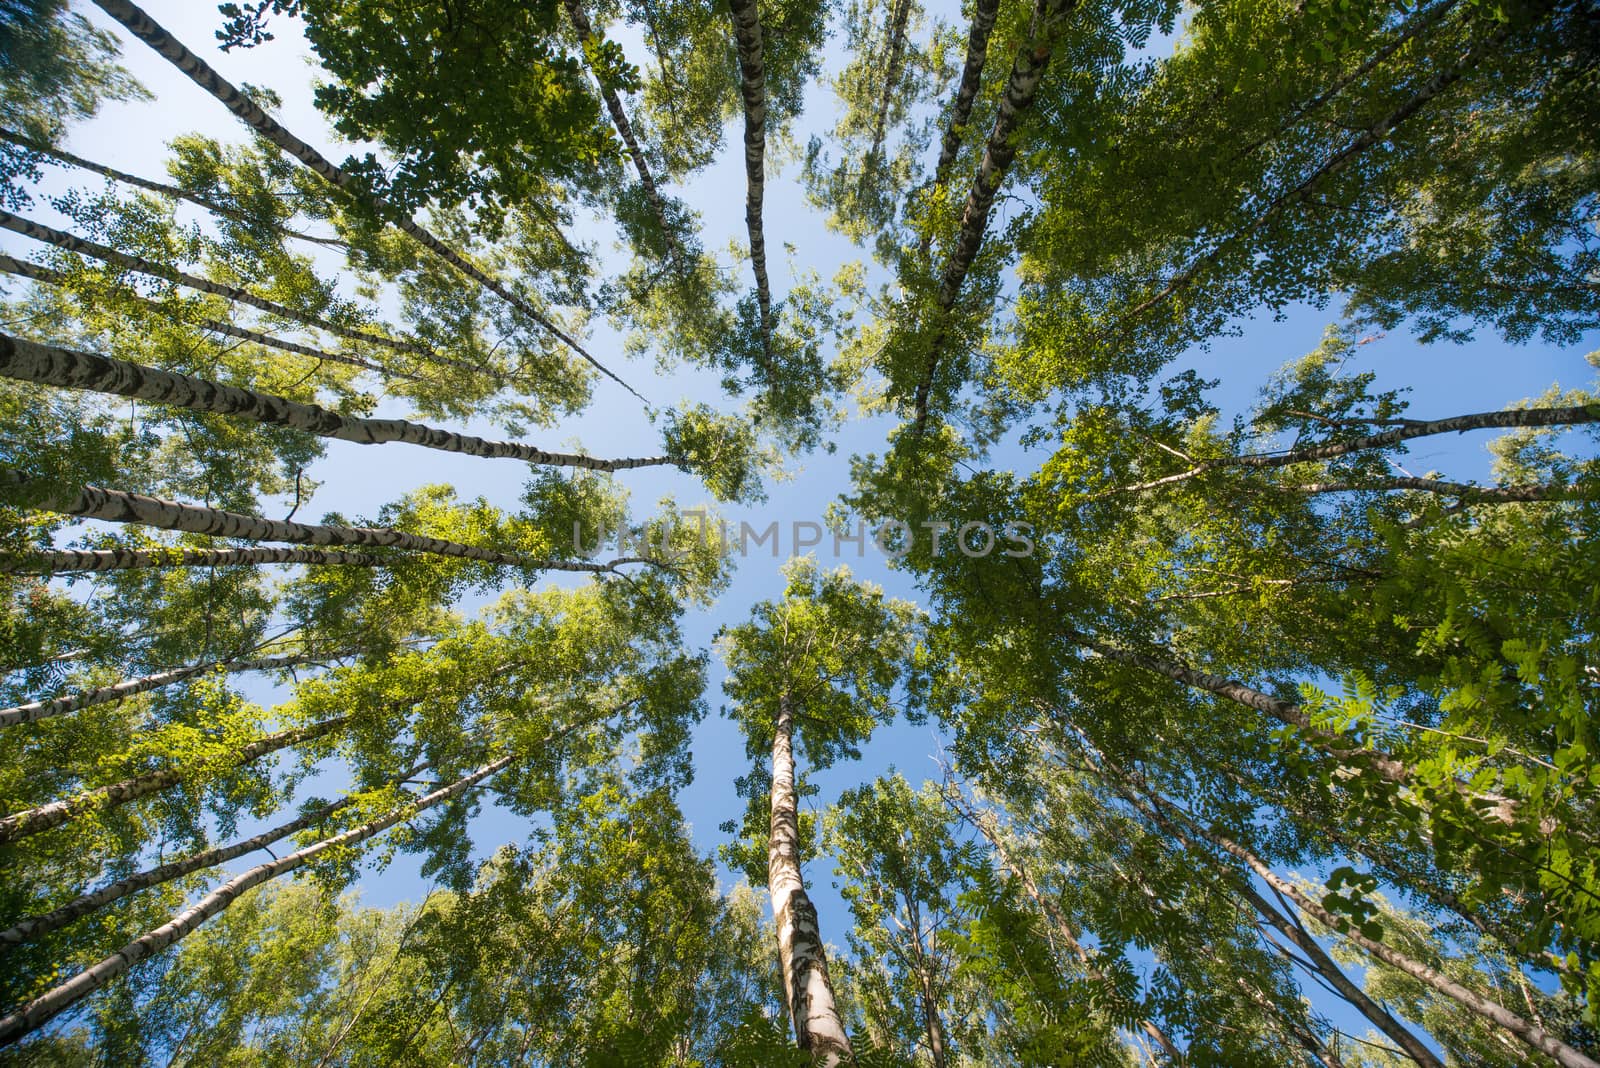 Looking up in Forest - Green Tree branches nature abstract background.